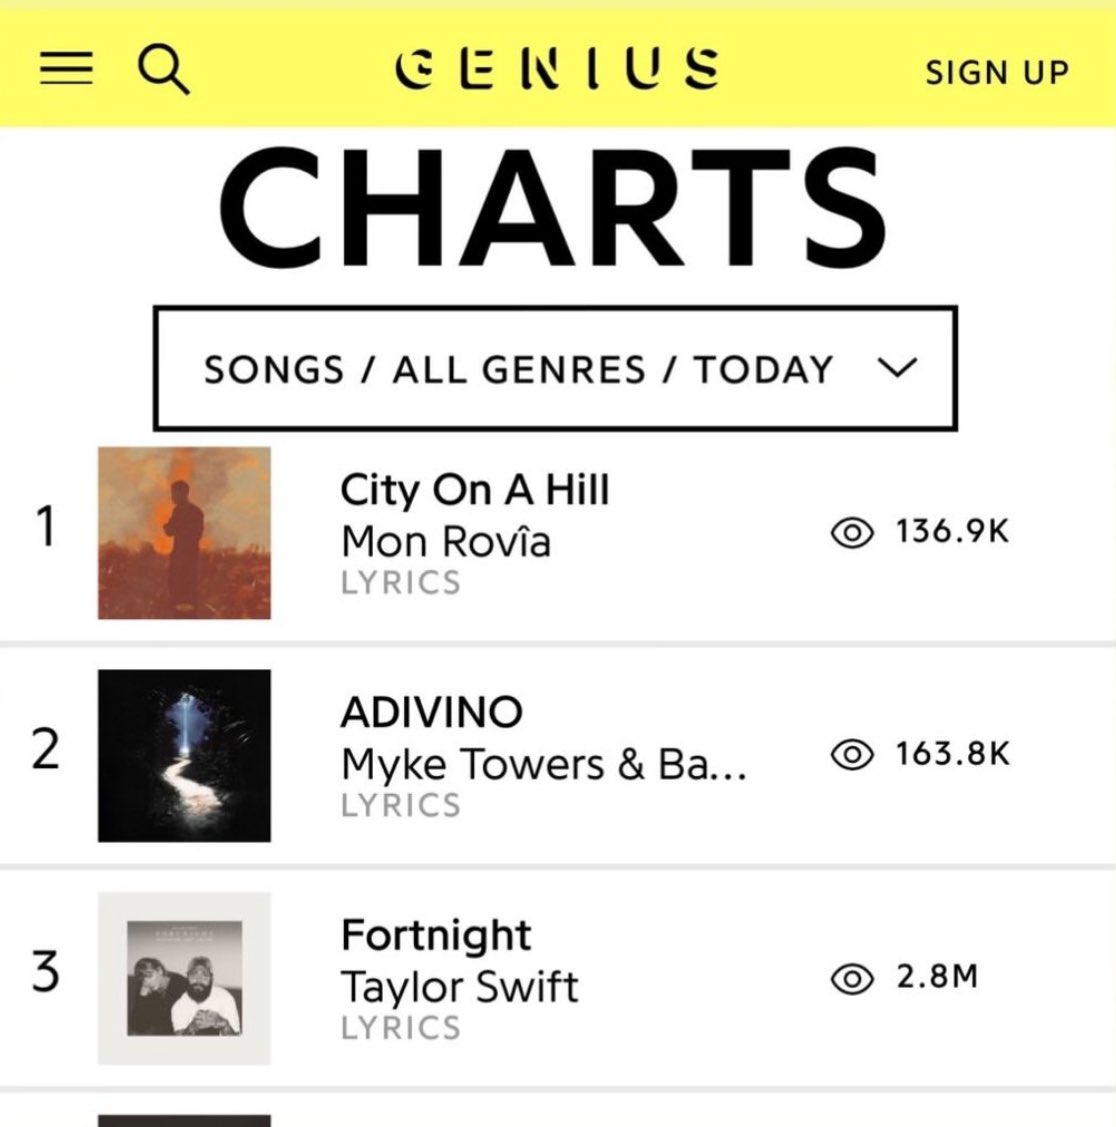 Y’all really got “city on a hill” to the top of the genius charts. Insane! 🥹🫂